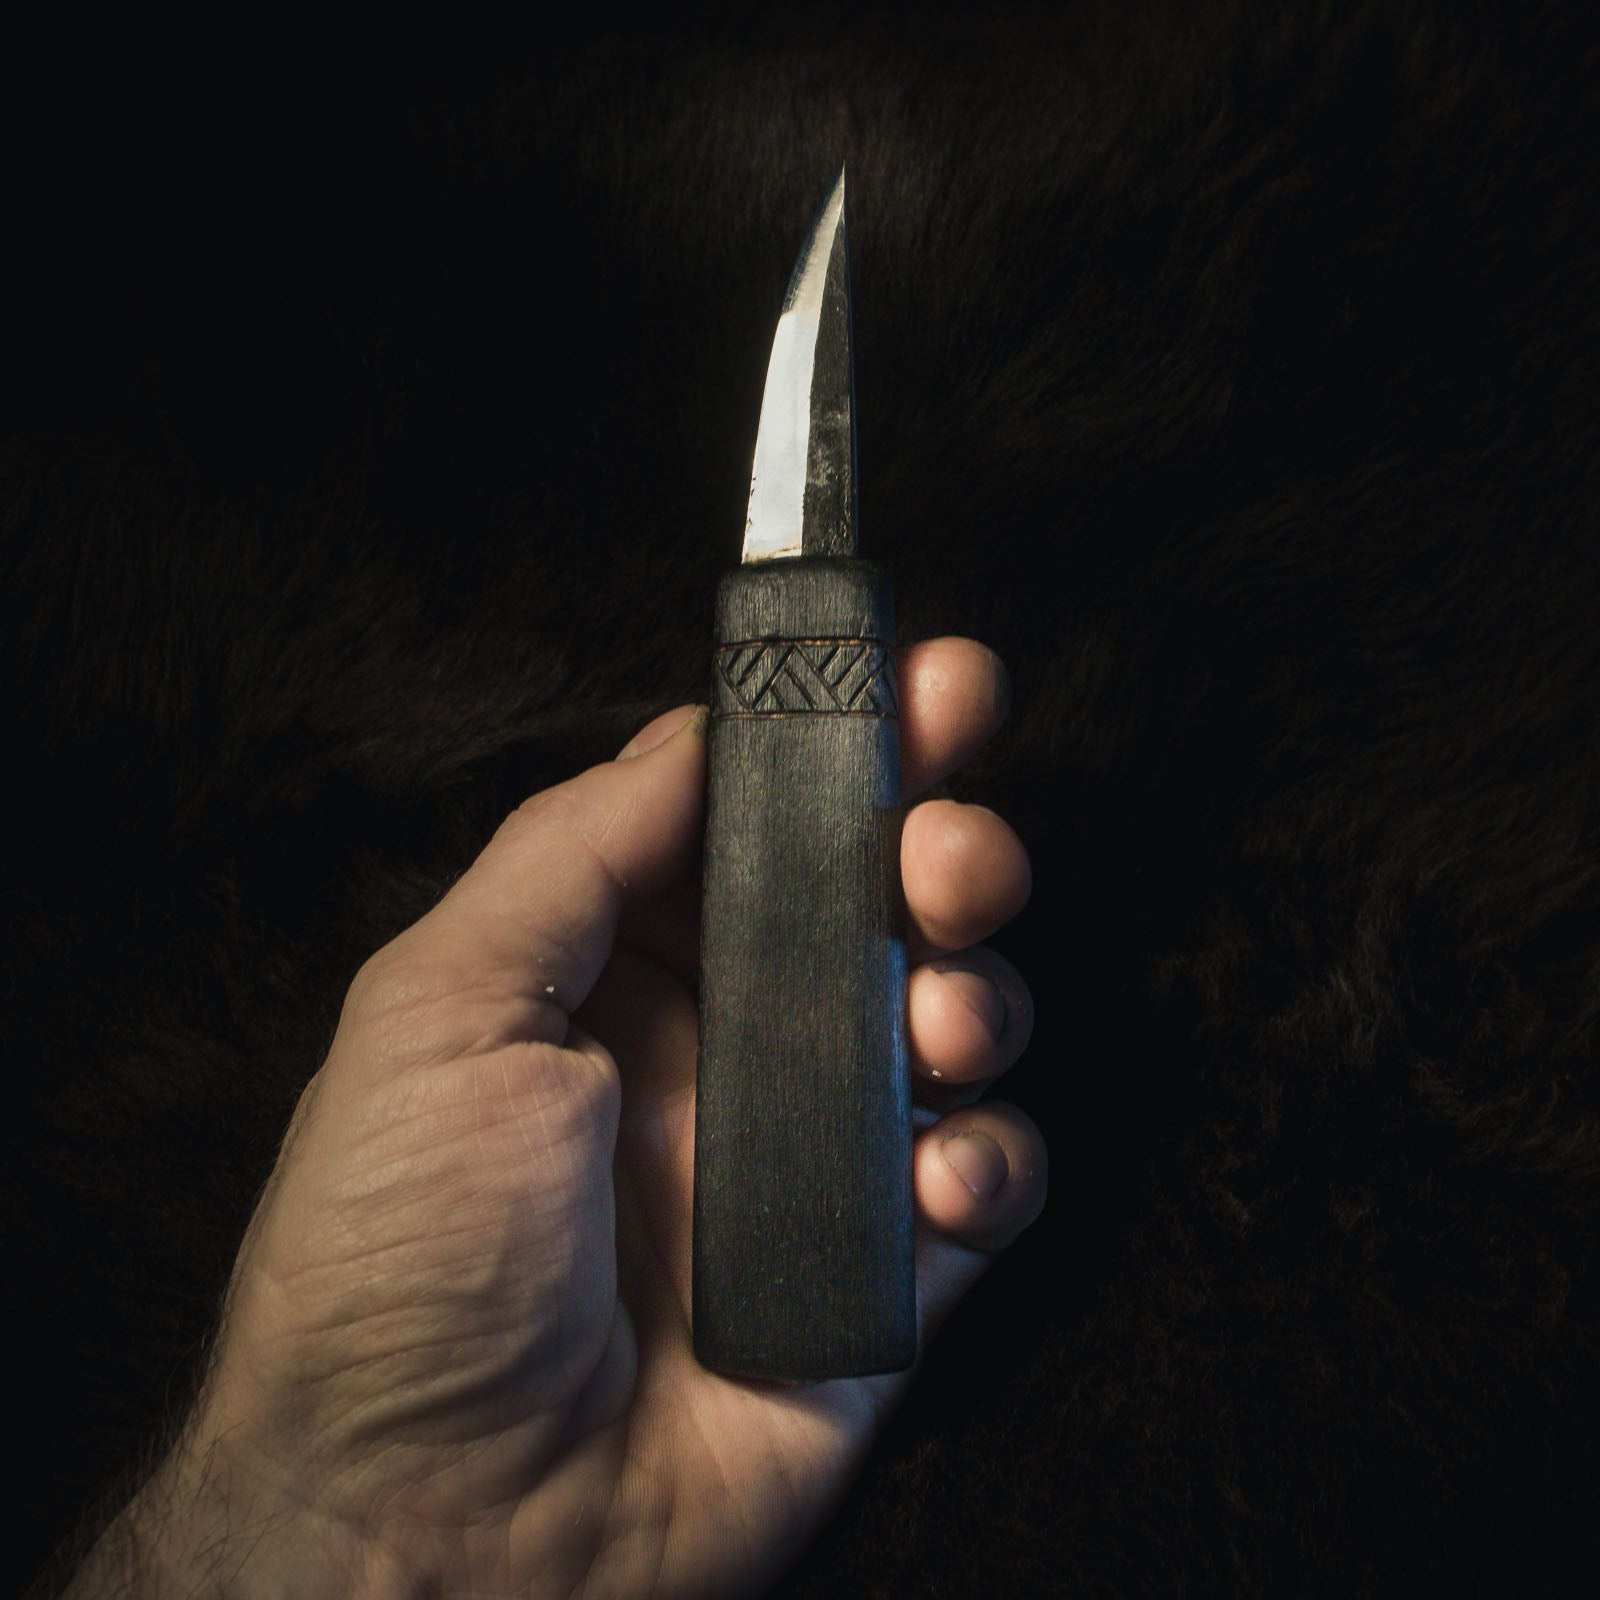 hand forged wood carving sloyd knife